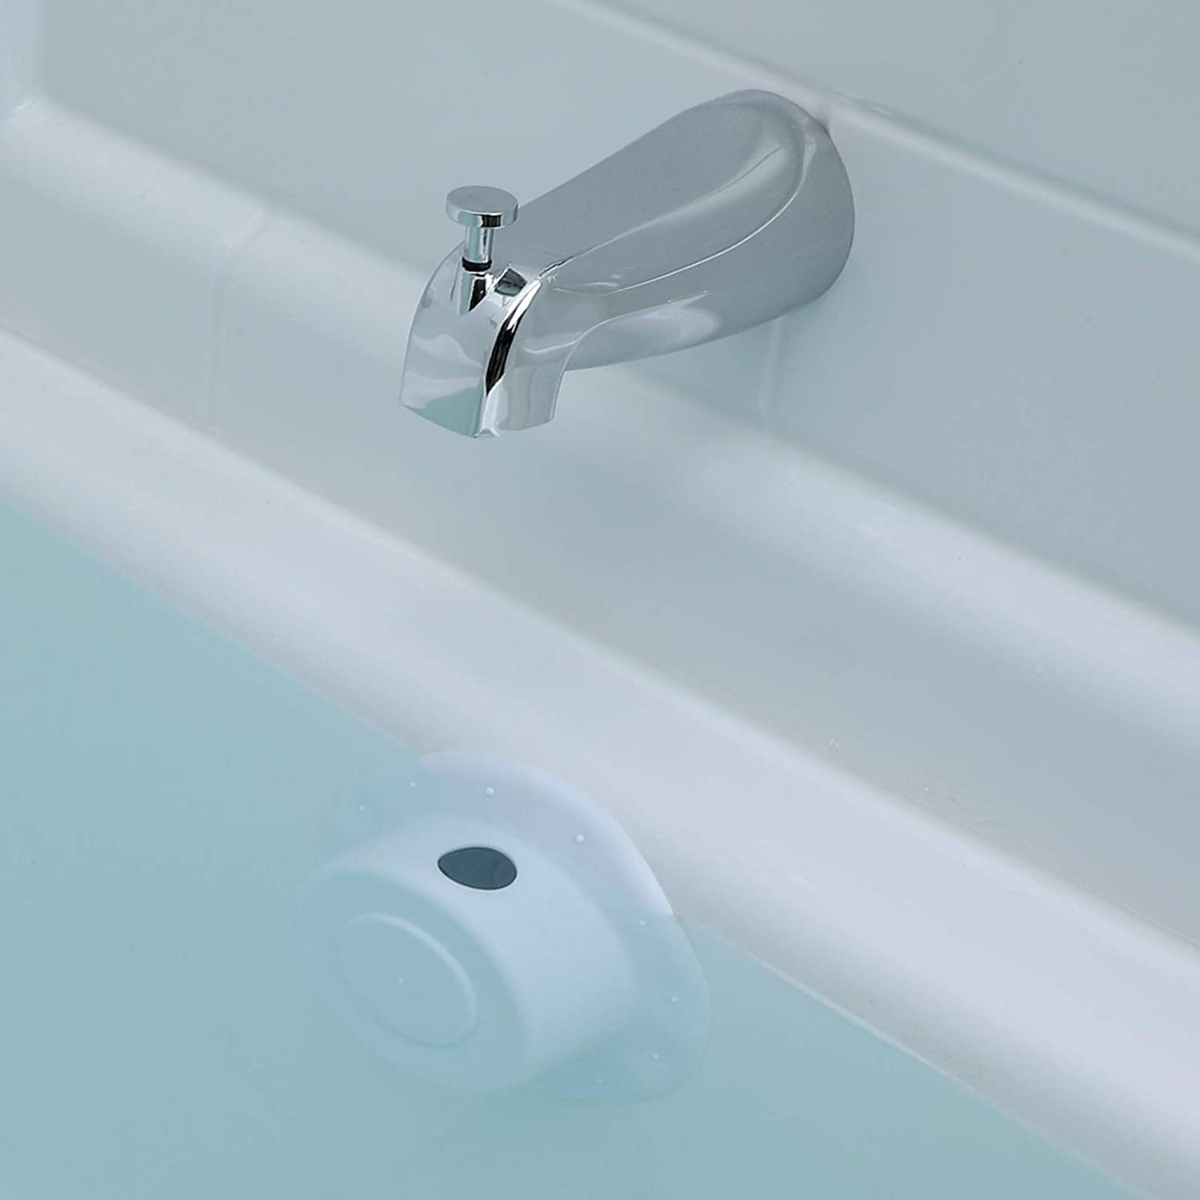 Gorilla Grip Bathtub Overflow Drain Cover, Adds Inches of Water for Deeper  Warmer Bath, Suction Cup Seal, Plug Stopper Covers for Tub Drain, Bathroom